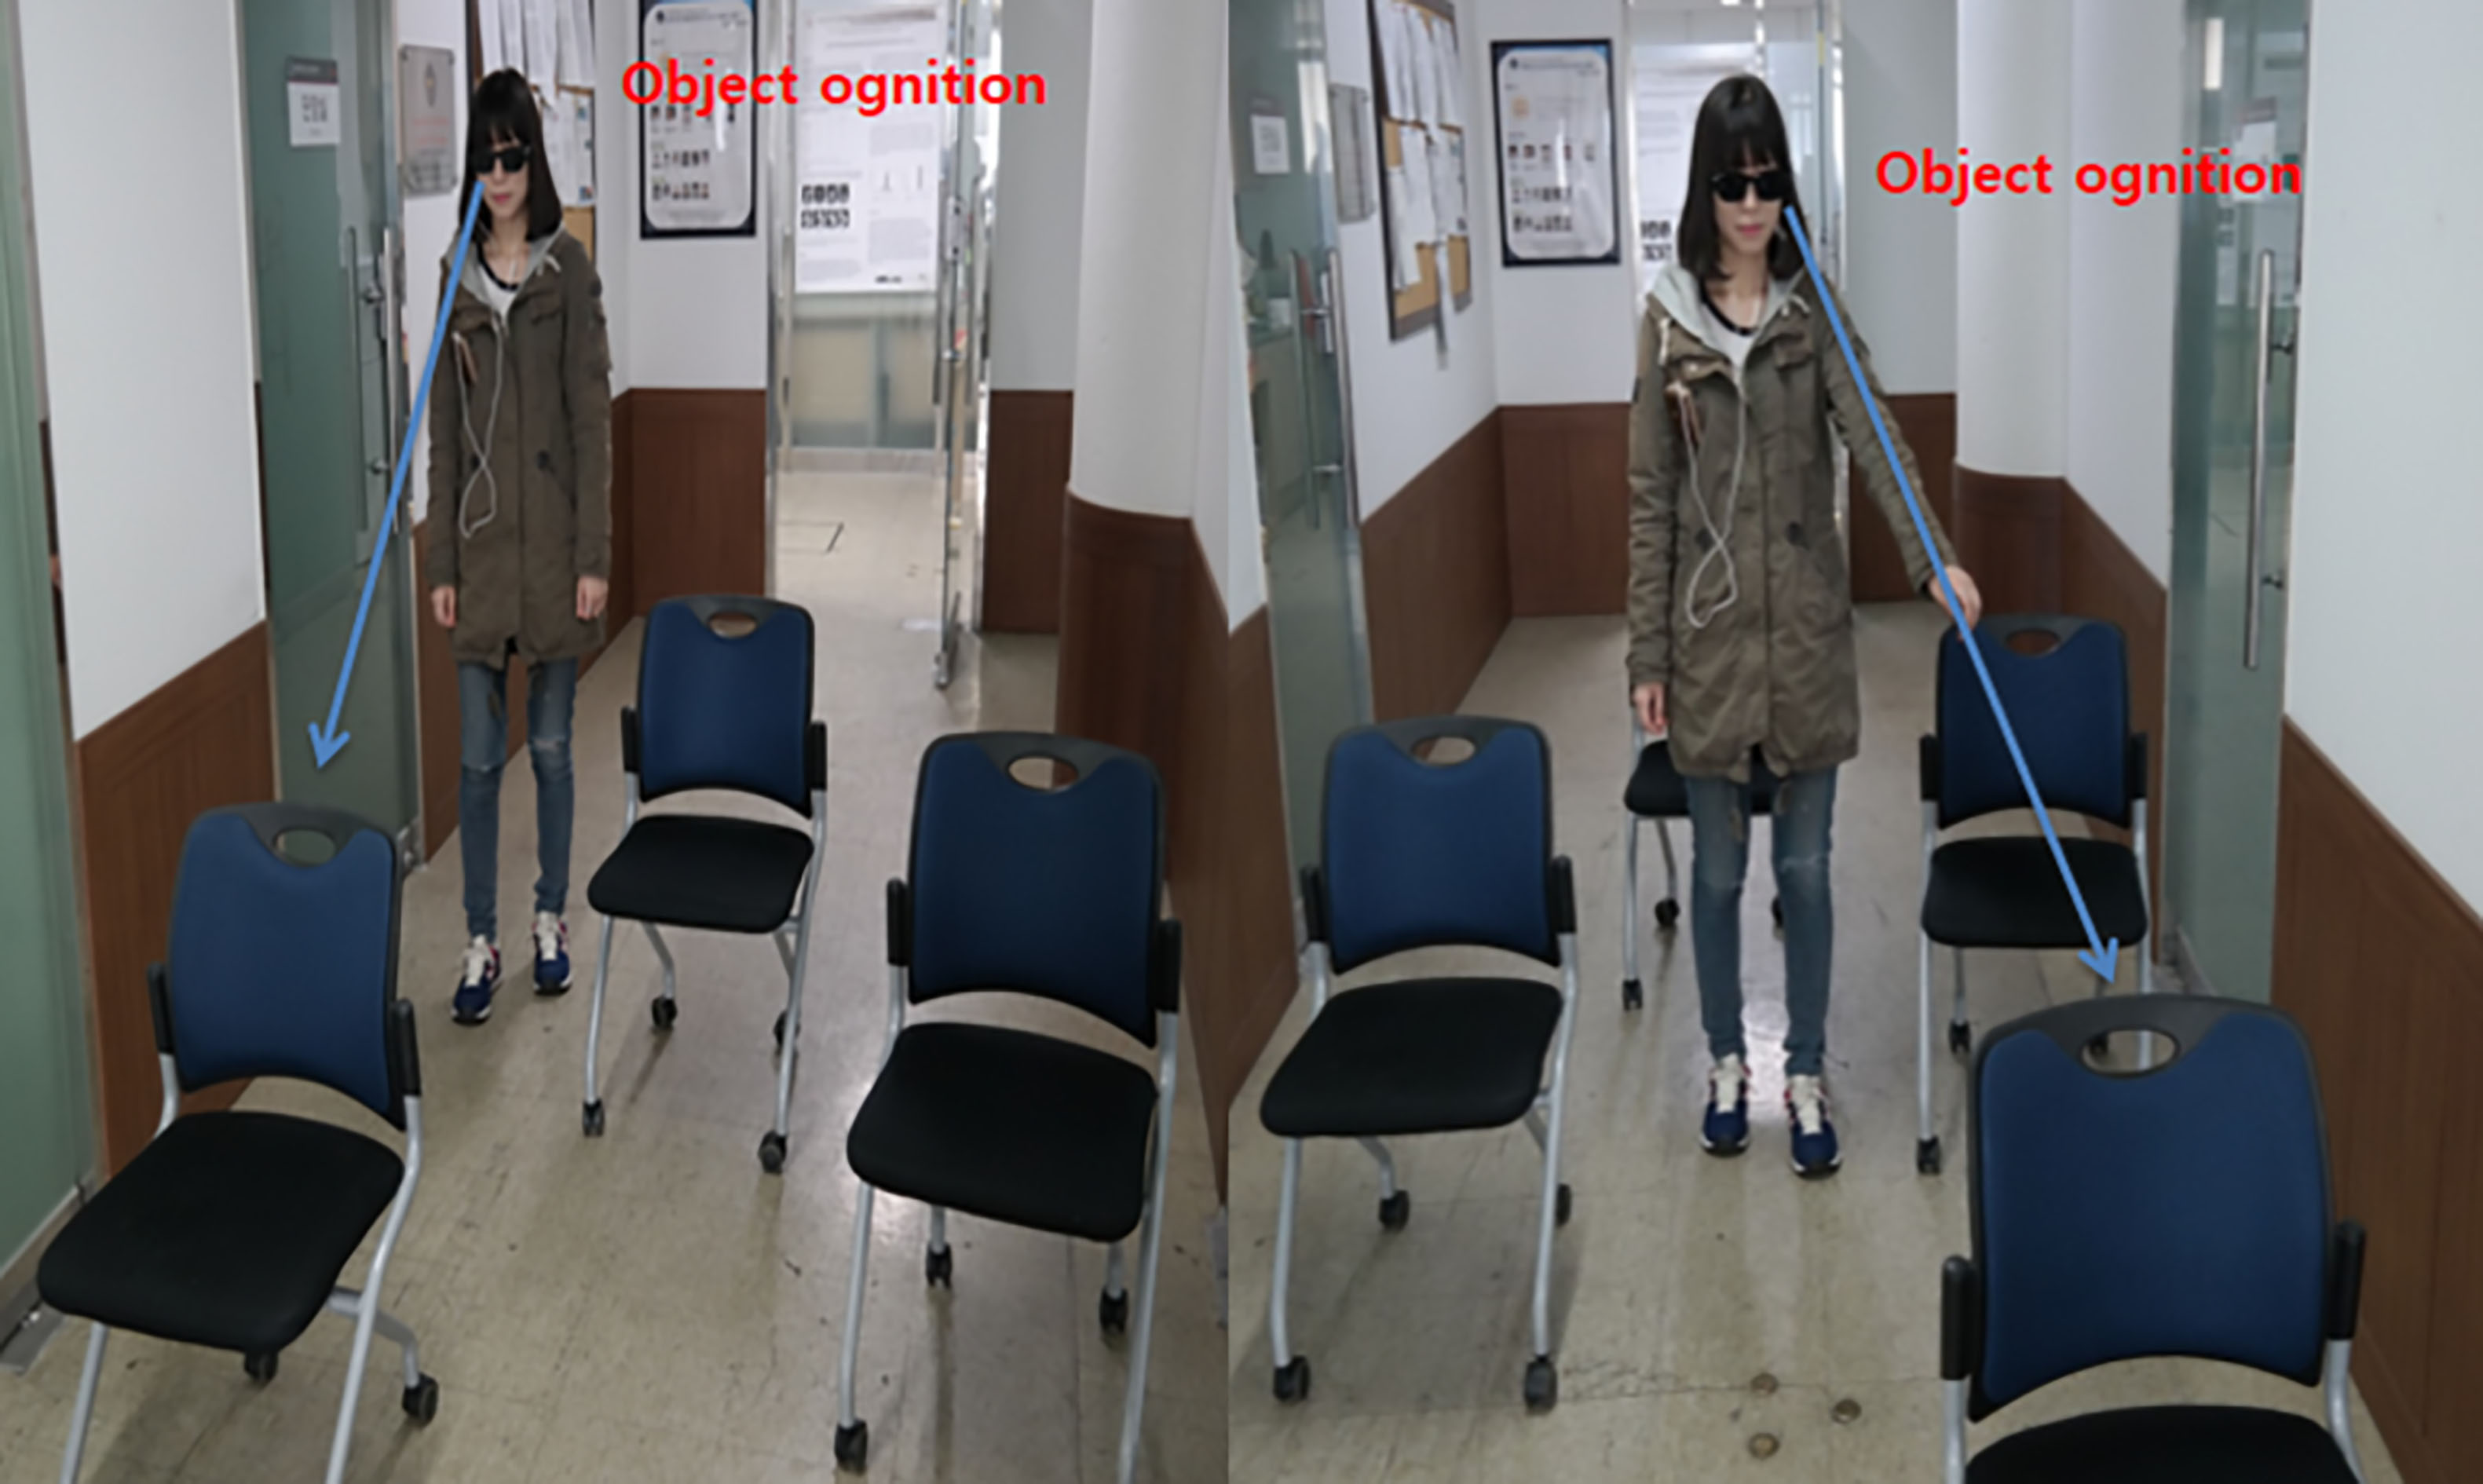 Subject wearing Visual System and passing obstacles while being aware of the objects.